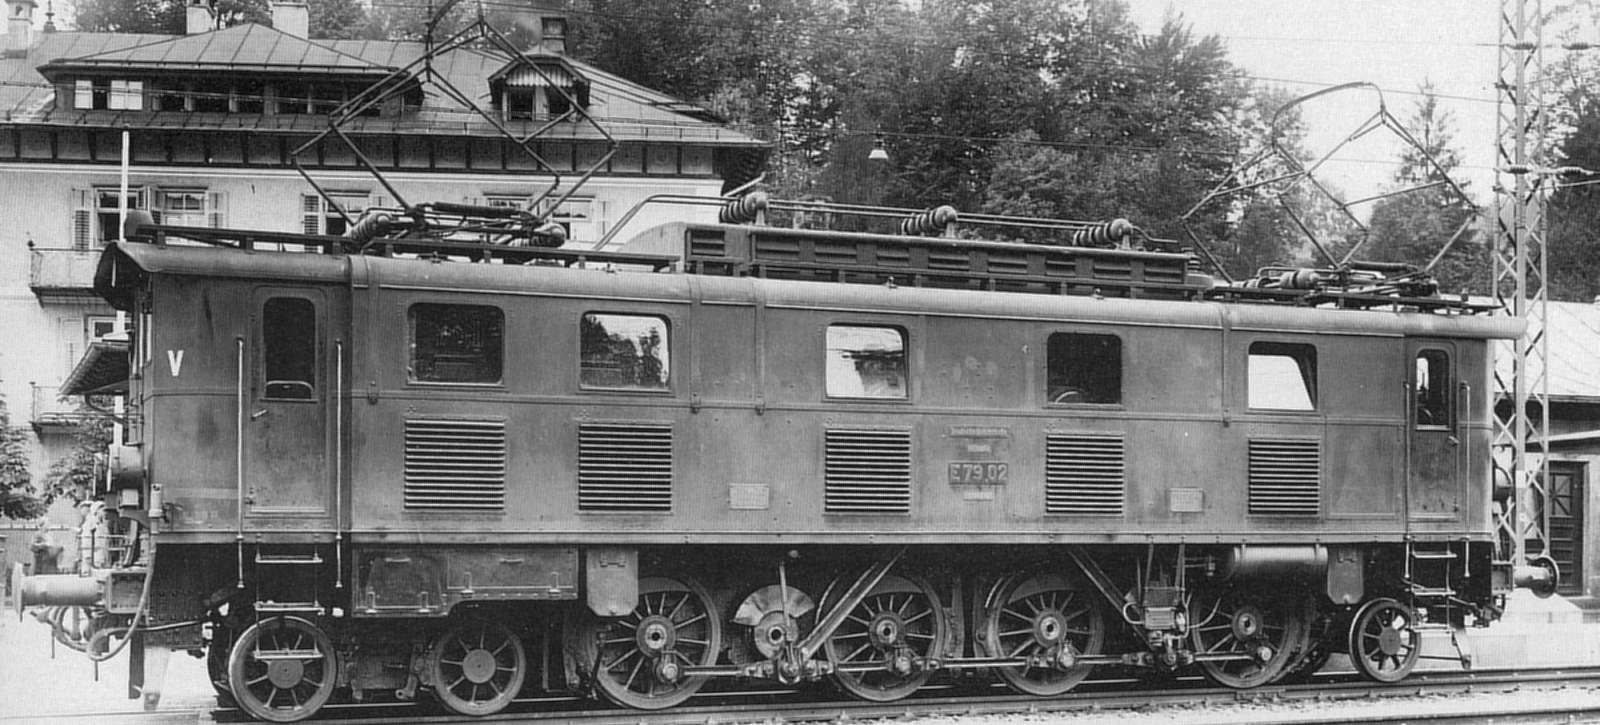 E 79 02 in the year 1927